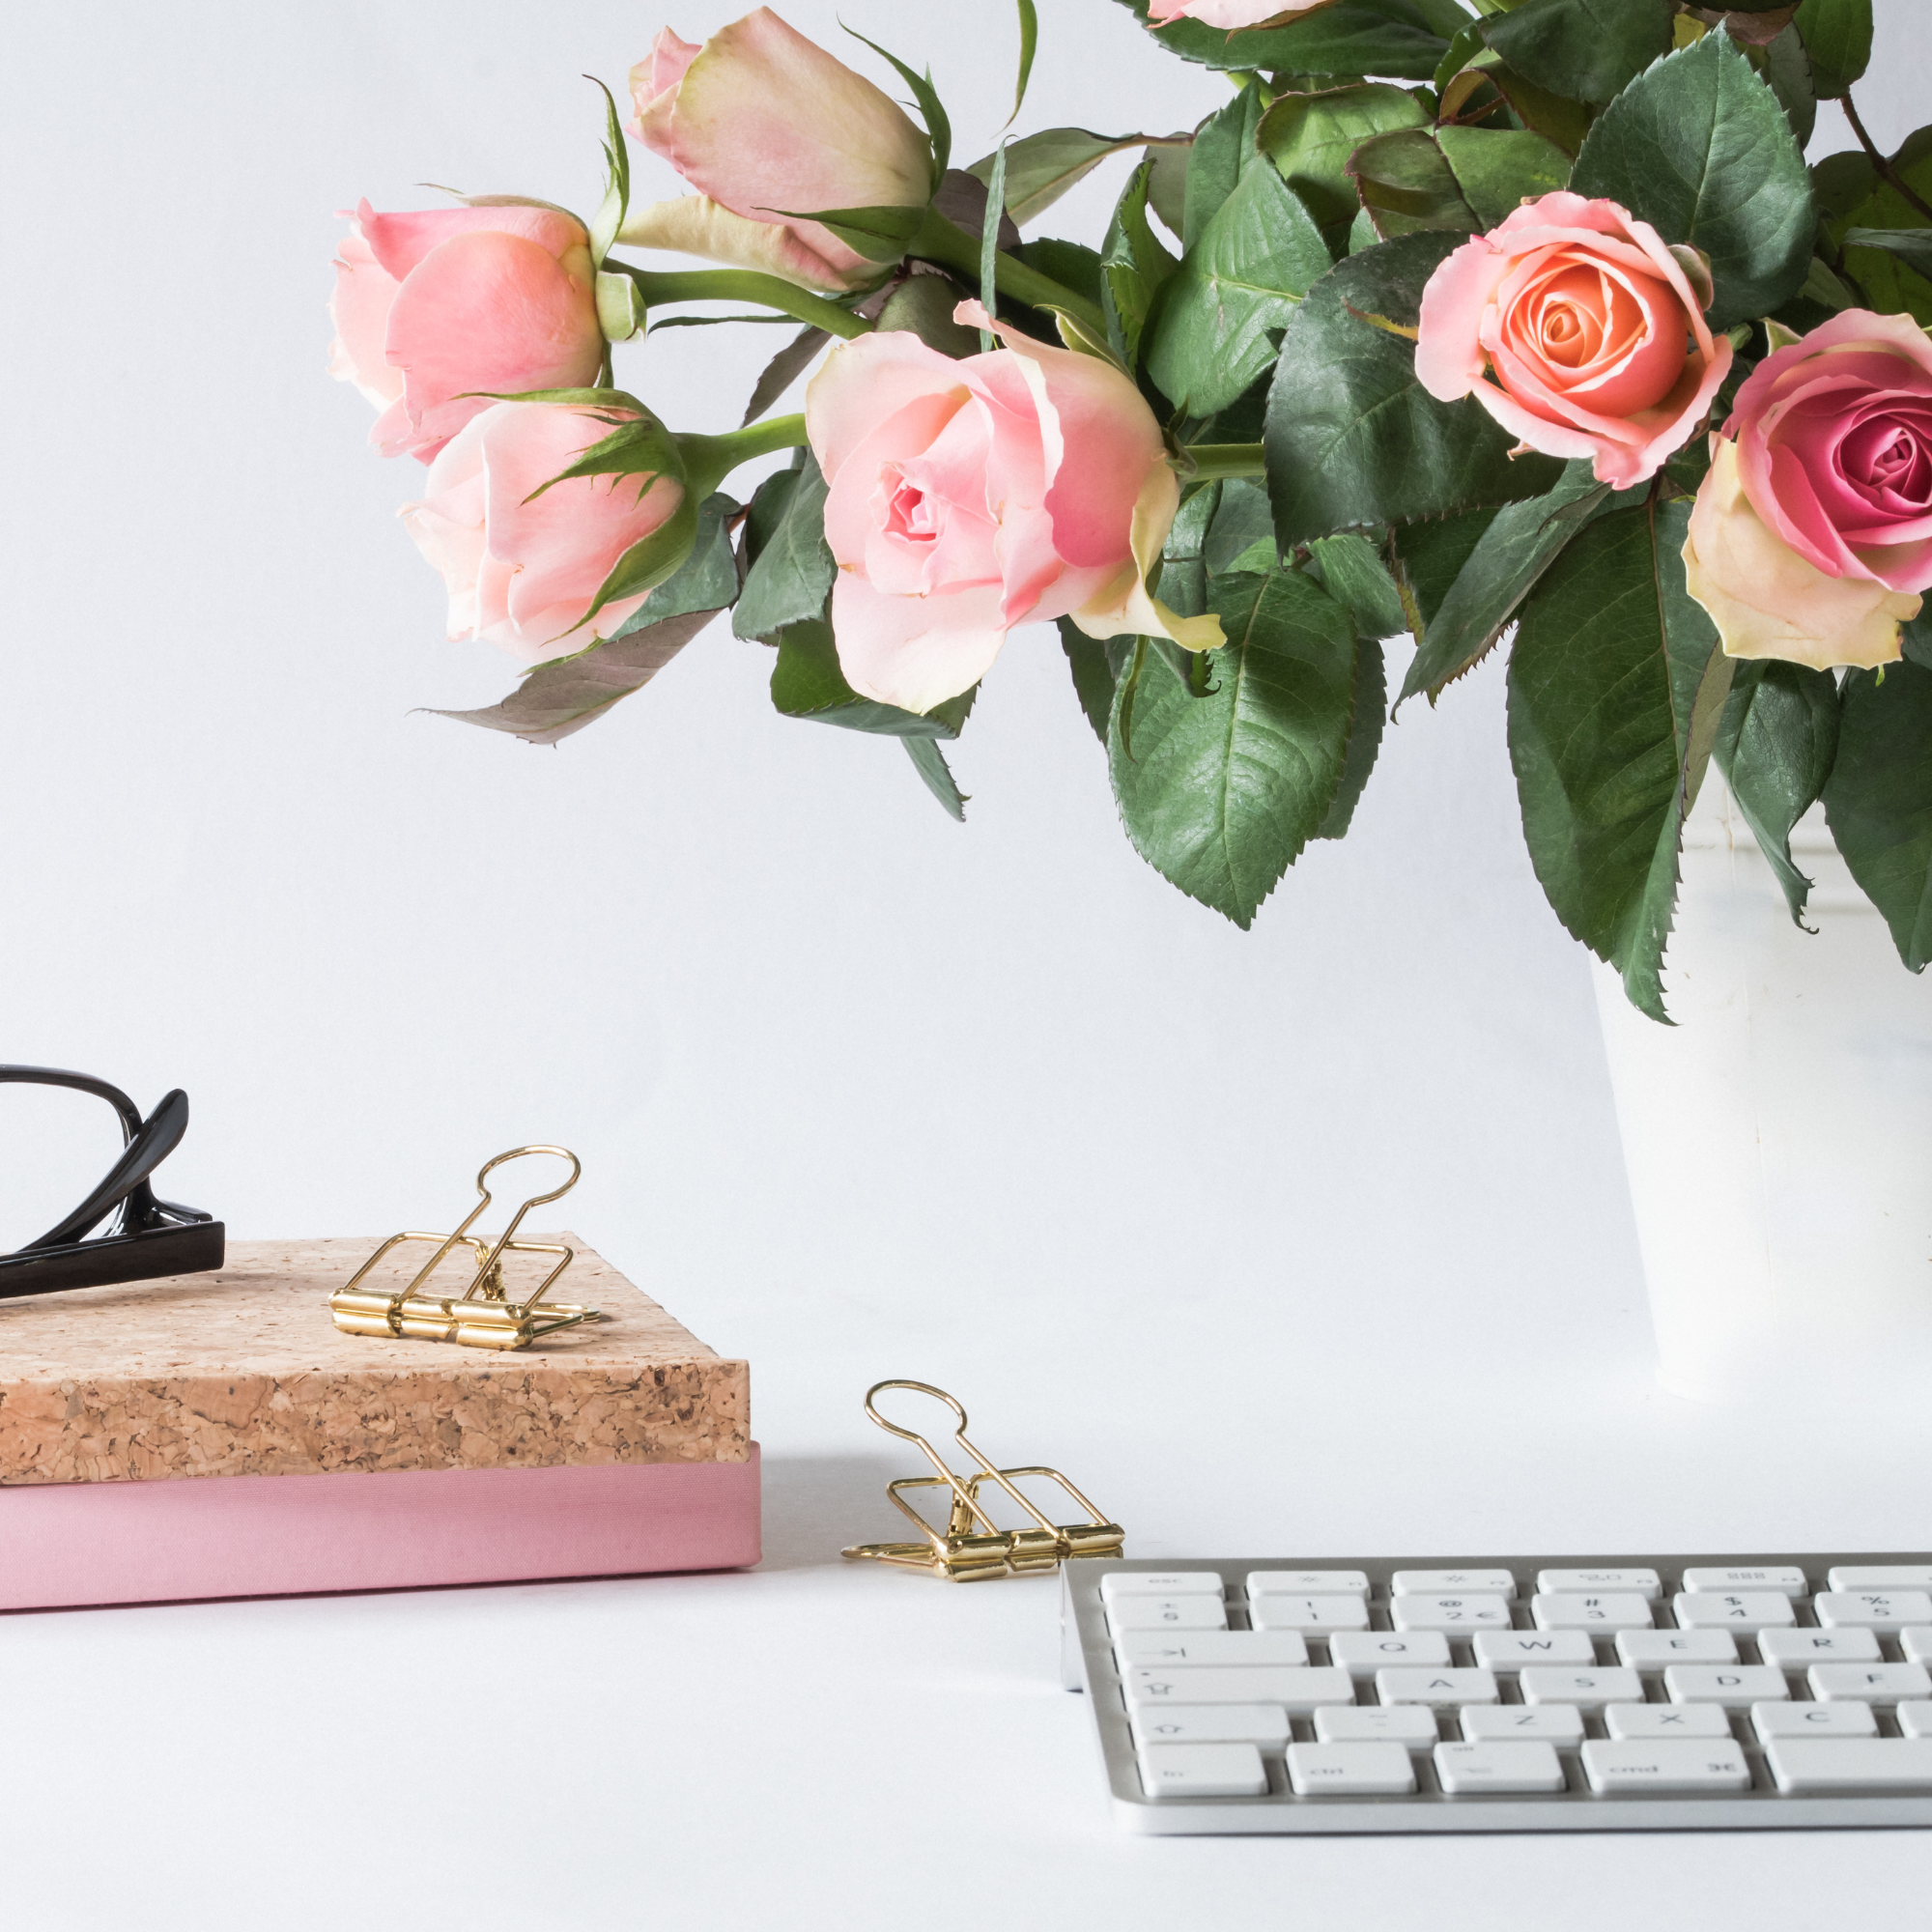 Pretty Desk with Roses